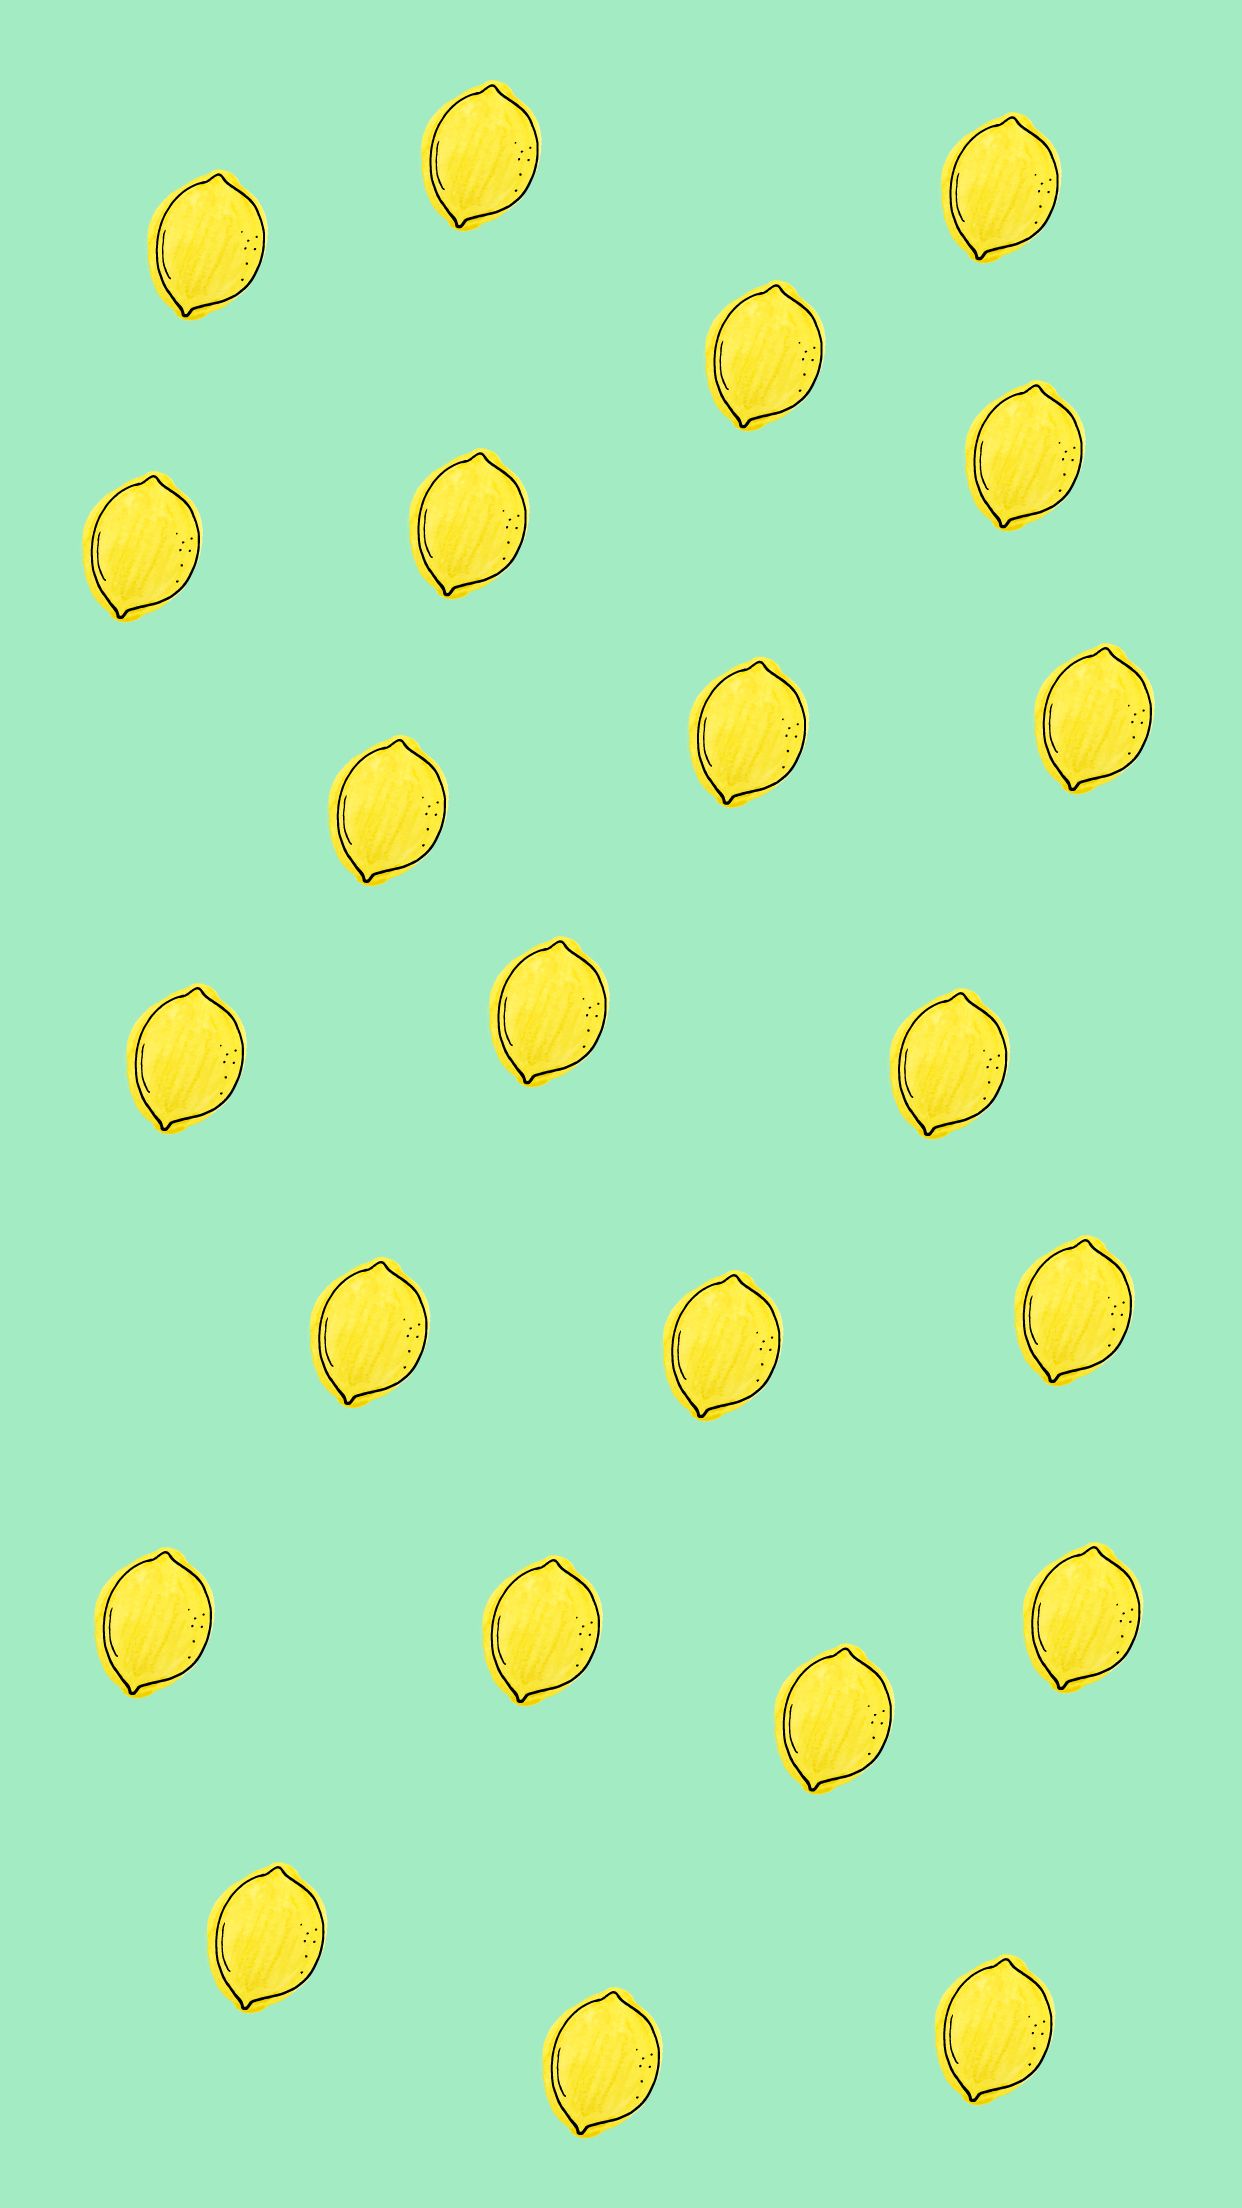 A pattern of yellow coins on green background - June, lemon